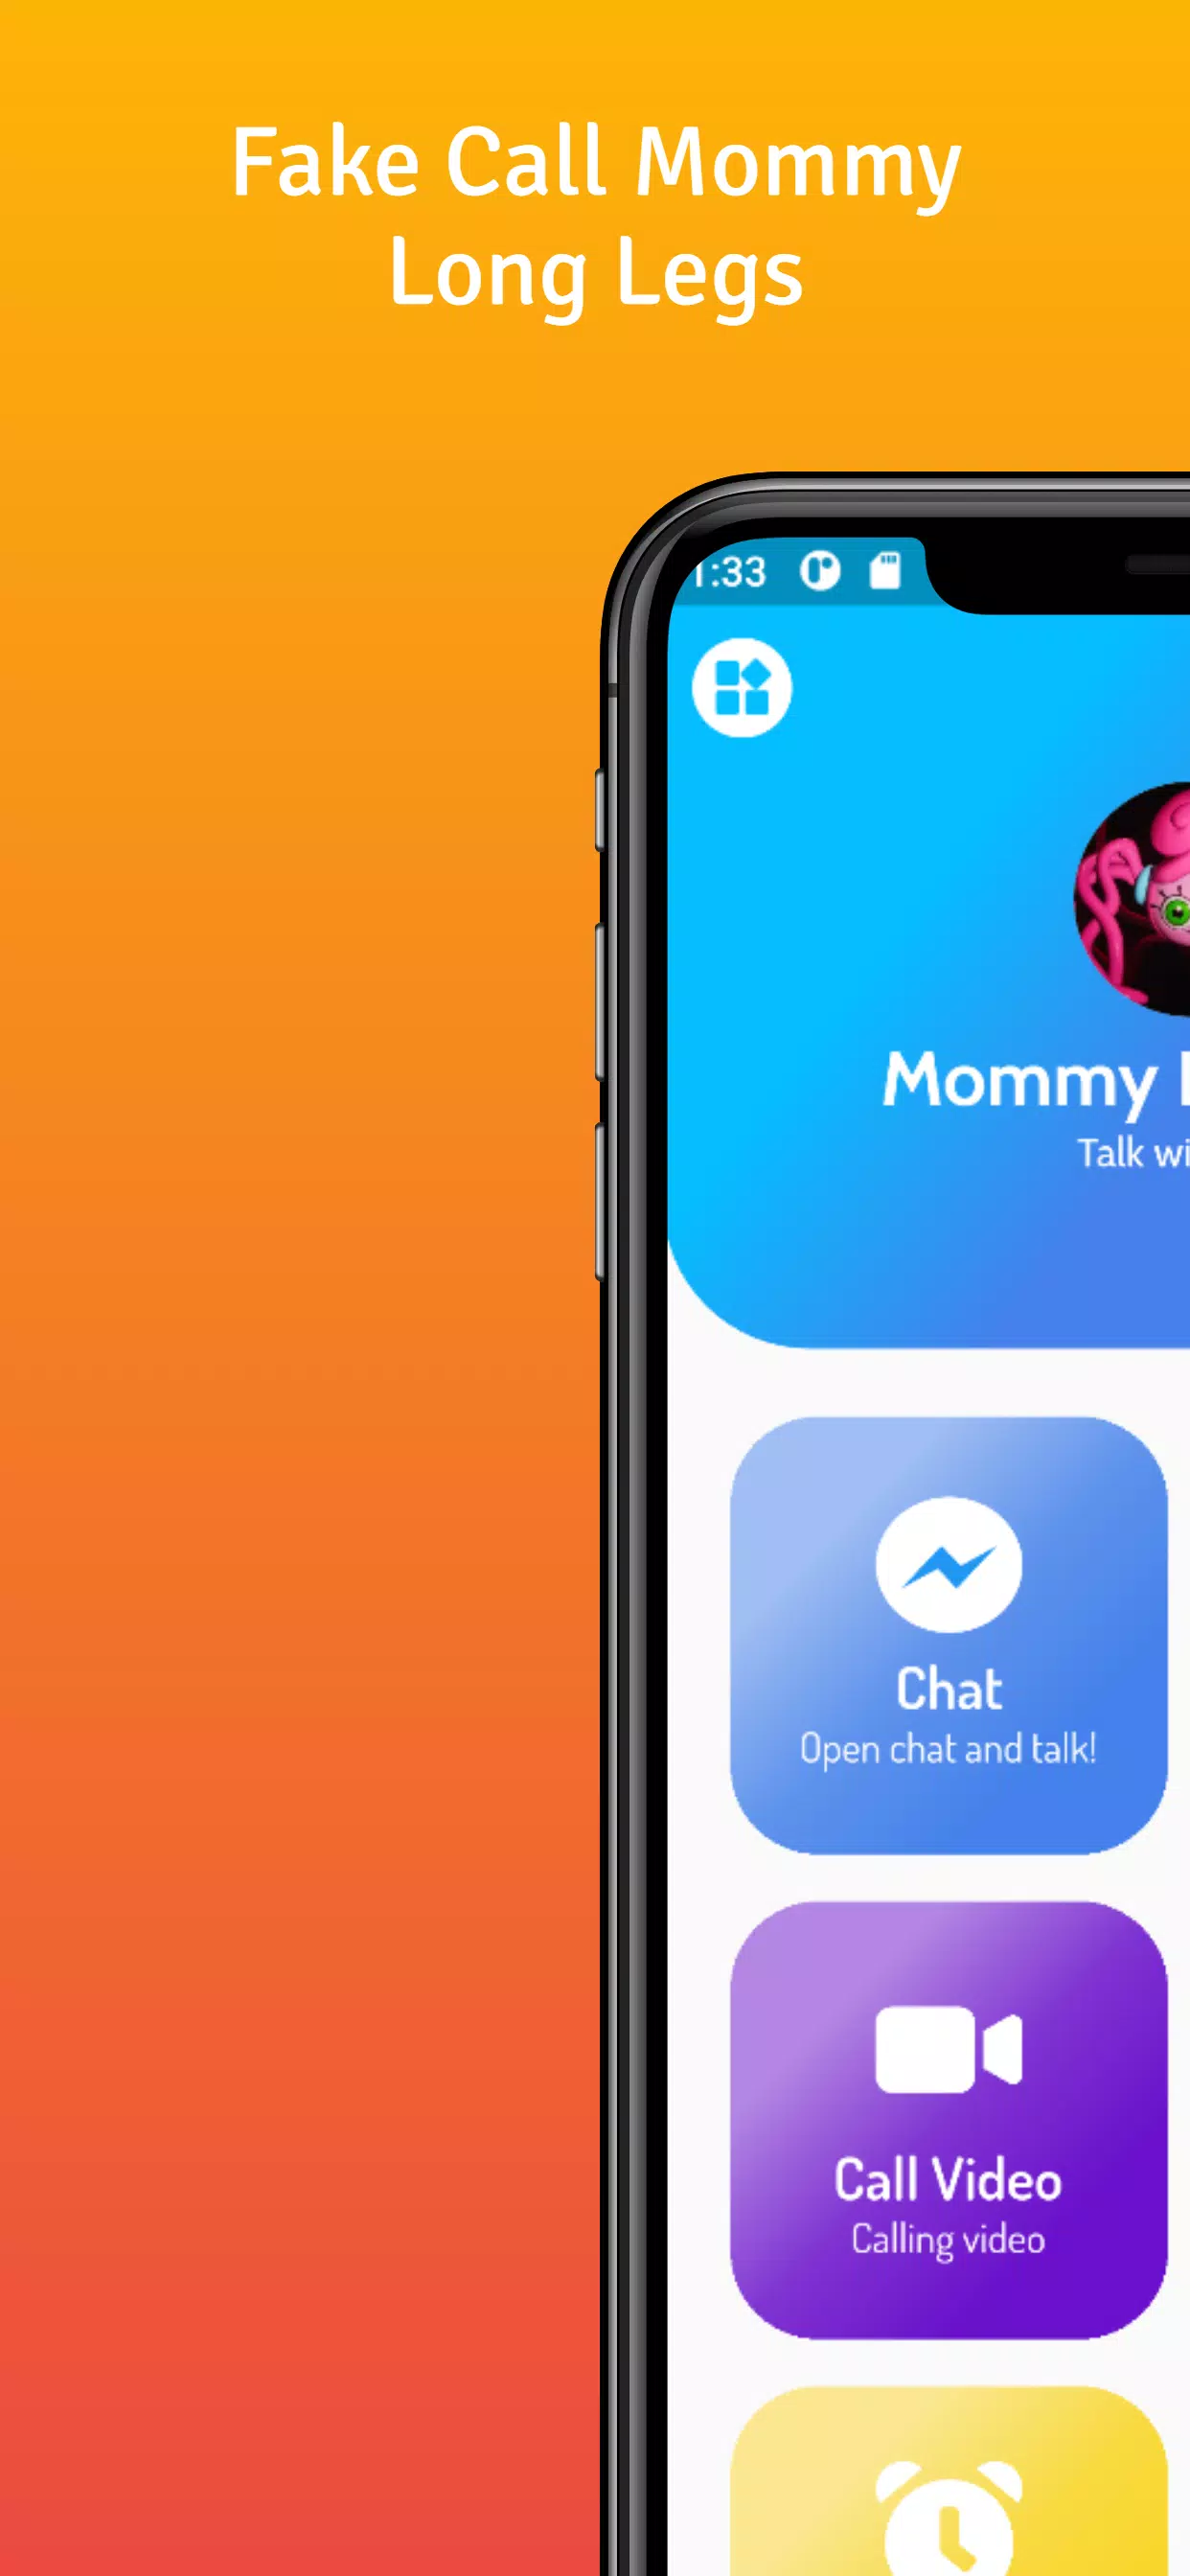 Mommy long legs prank call APK for Android Download